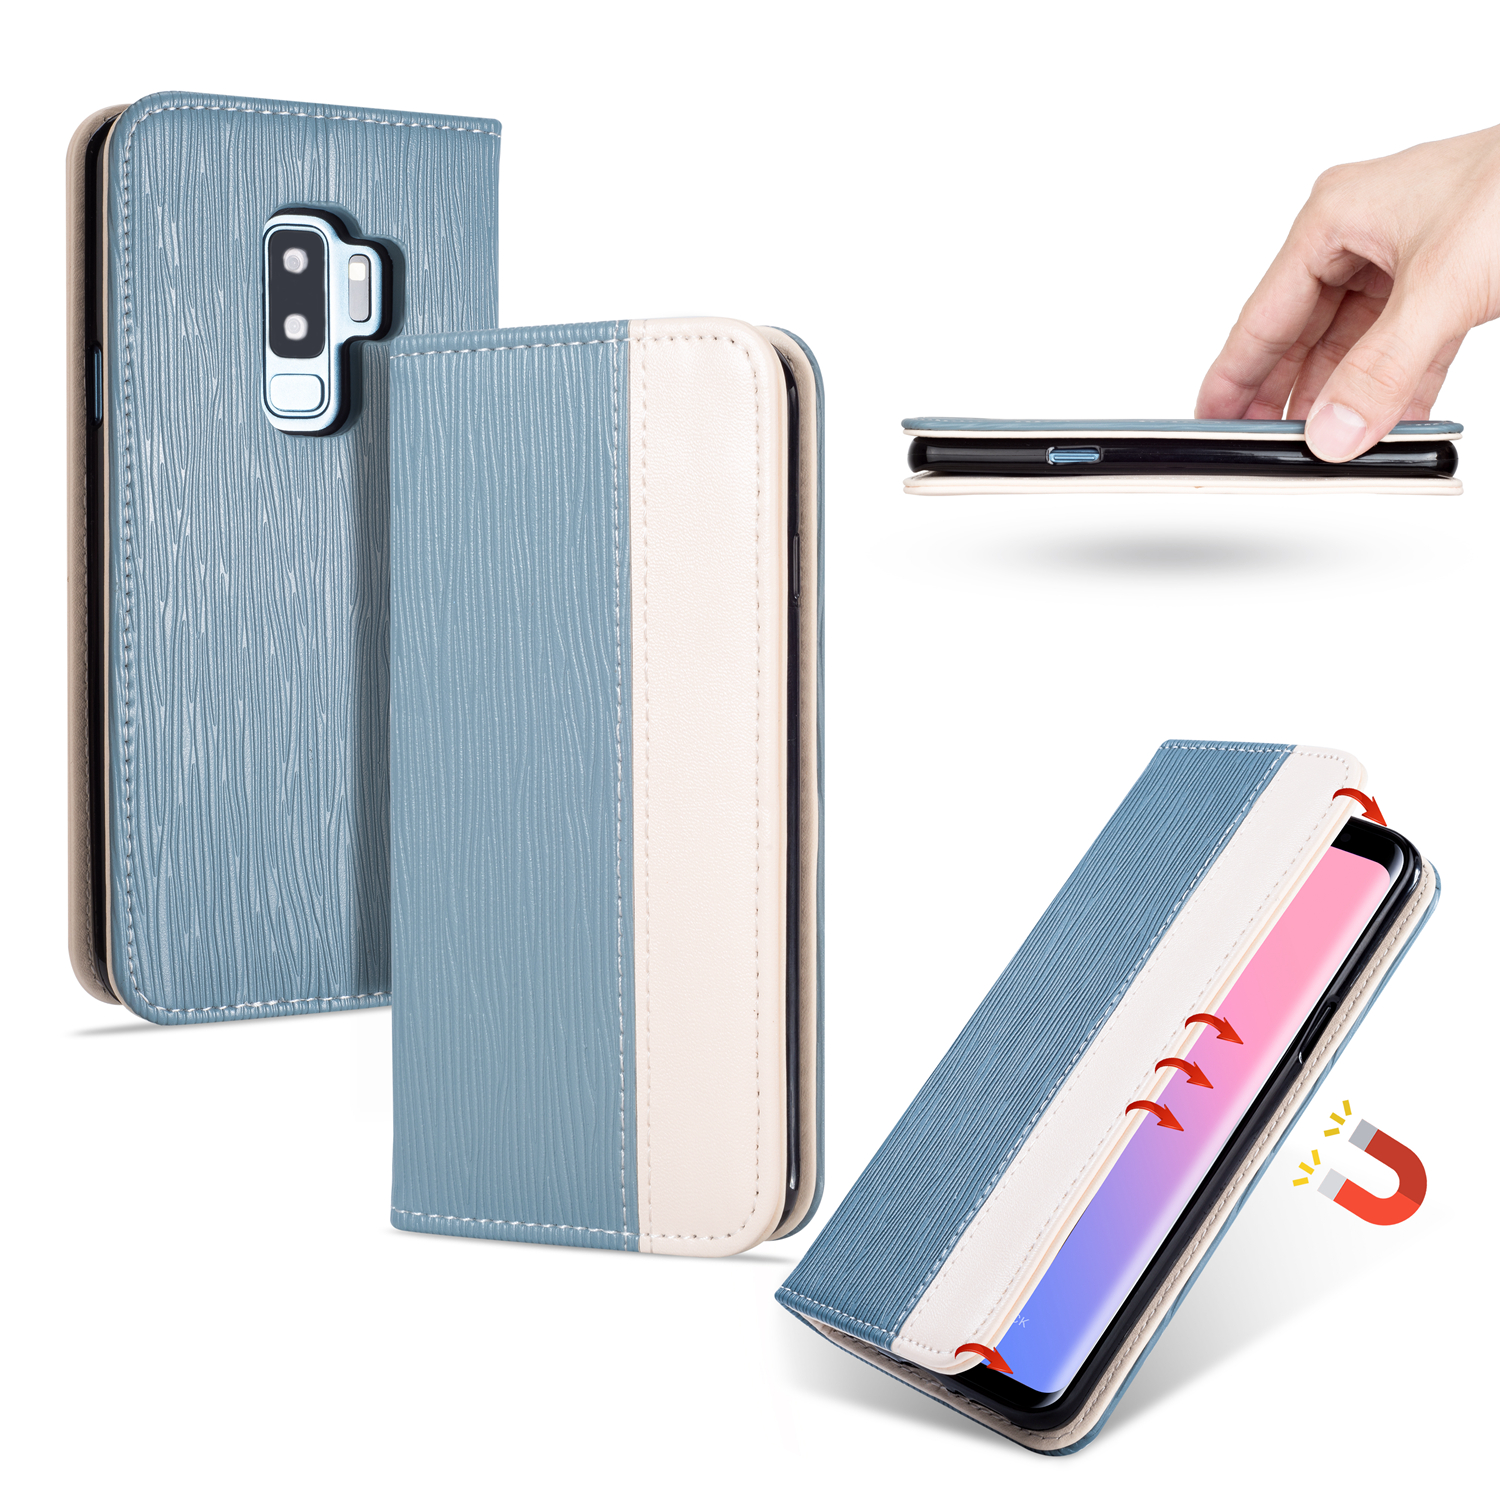 

Bakeey Premium Magnetic Flip Card Slot Kickstand Protective Case For Samsung Galaxy S9 Plus